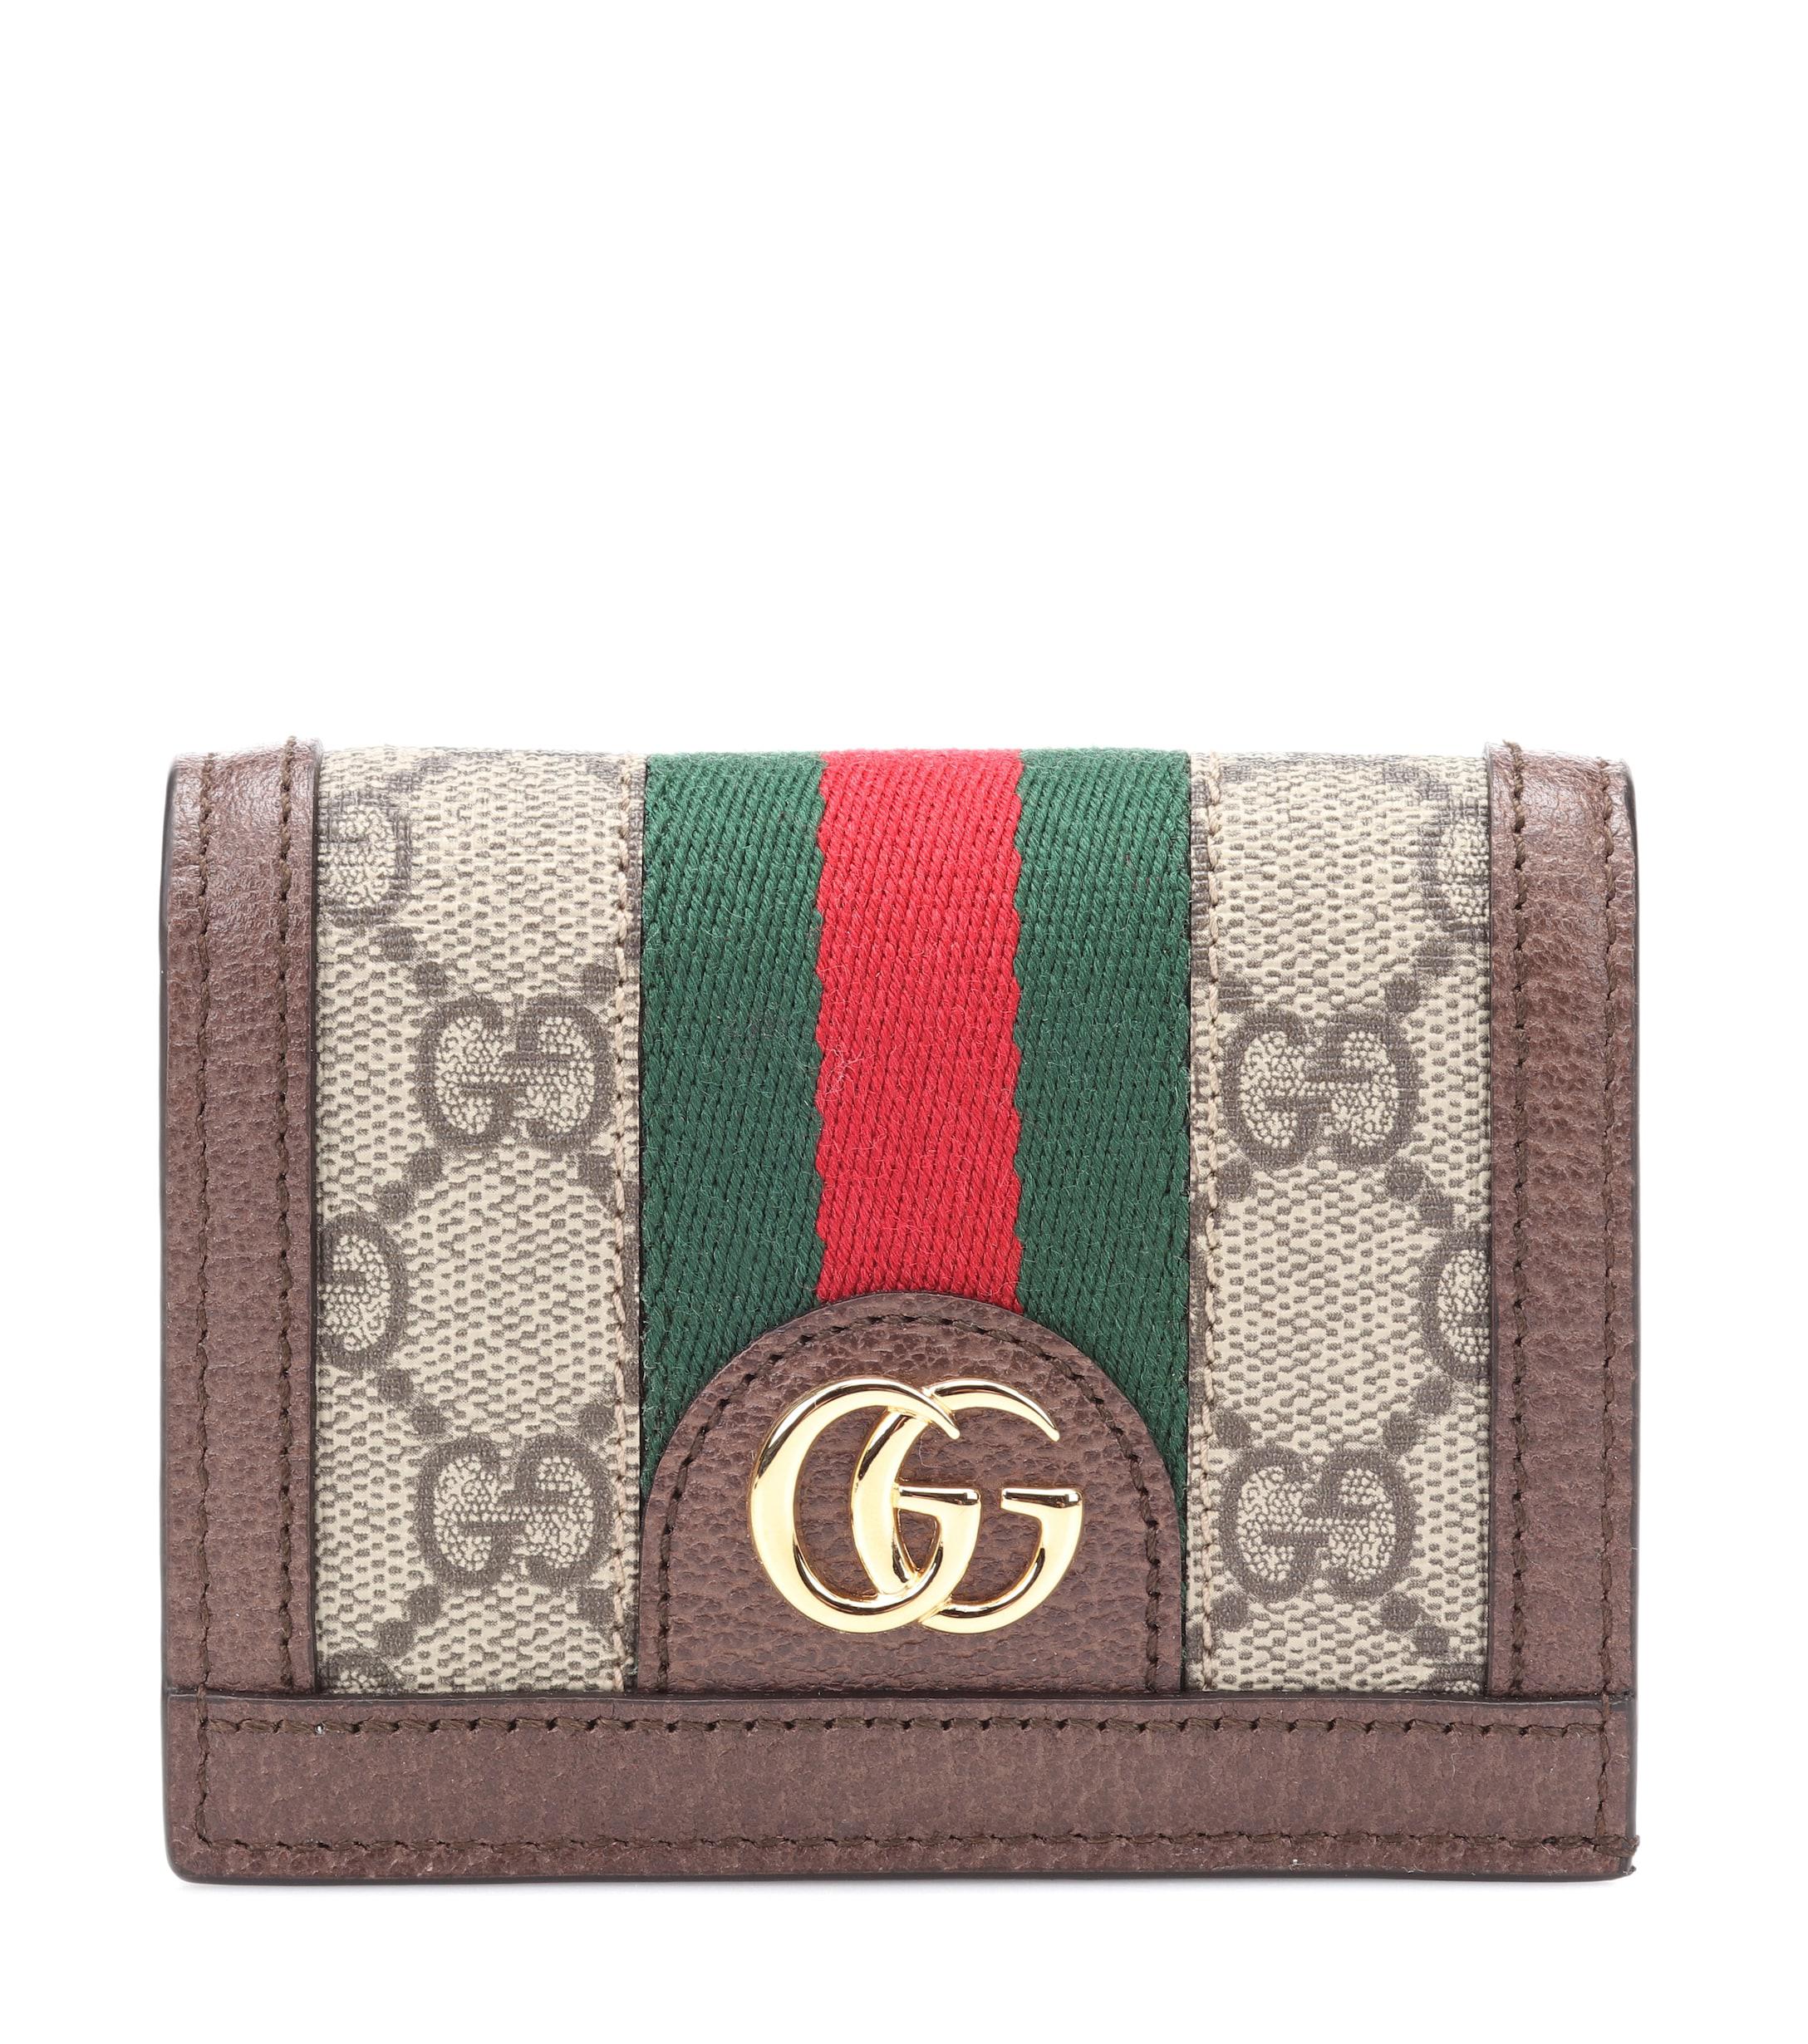 Gucci Leather Ophidia Gg Supreme Compact Wallet in Beige/Brown (Brown ...